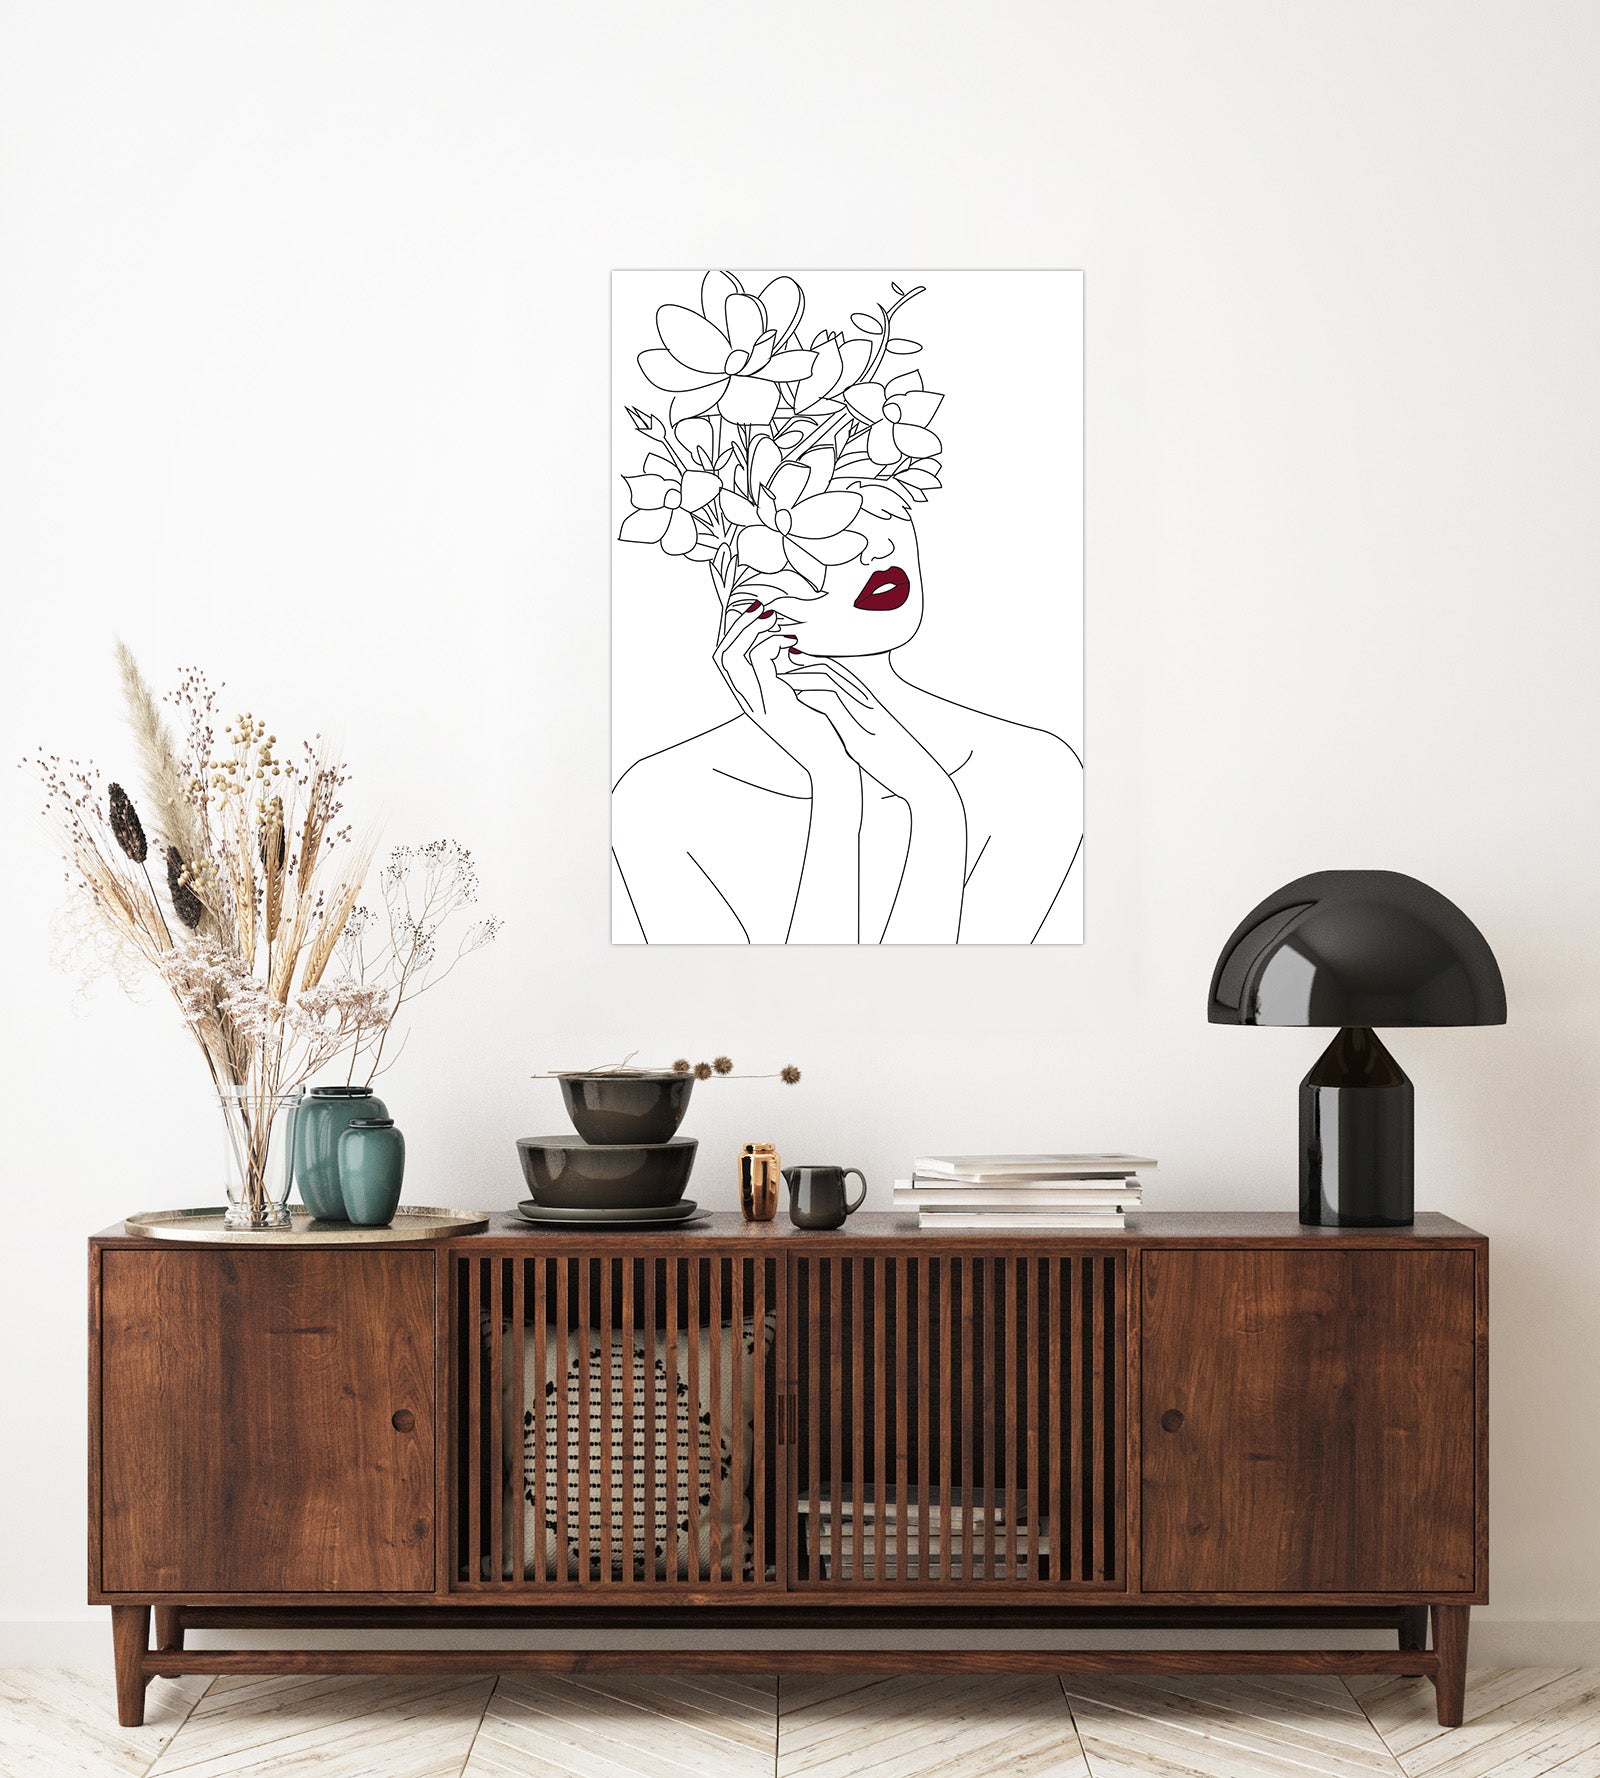 "Line Art Large Wall Painting (Woman and Flowers) "